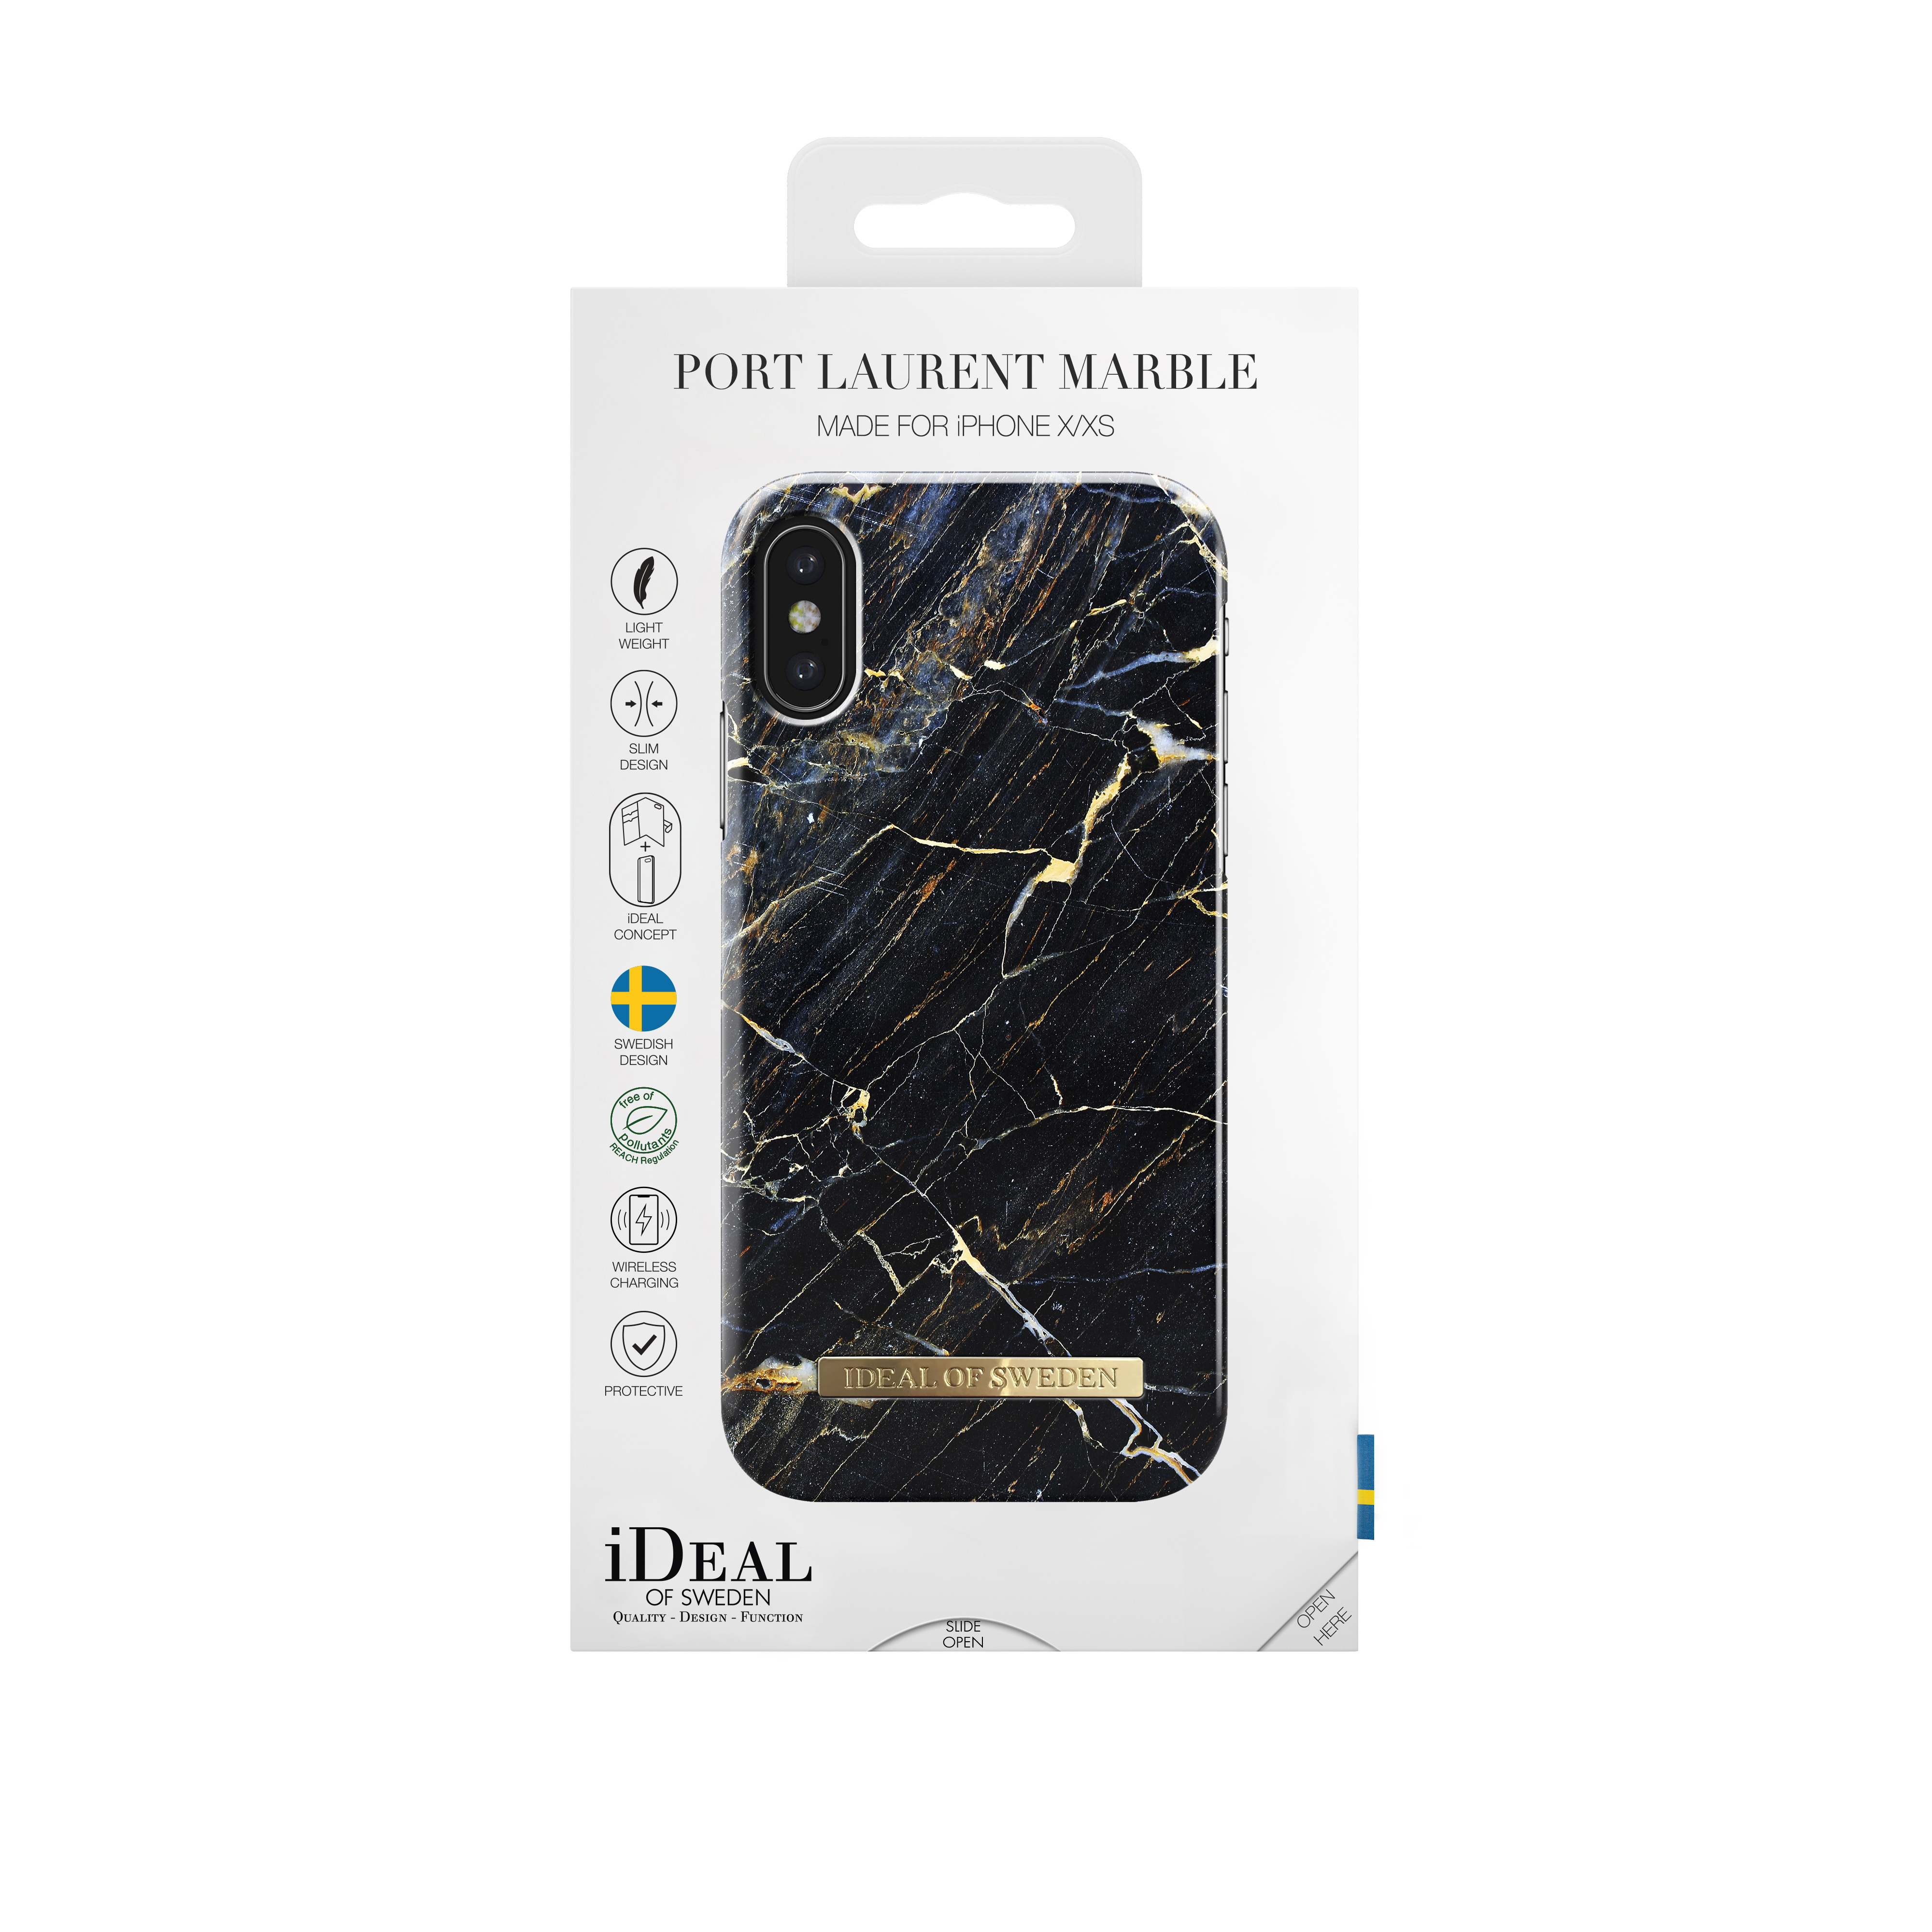 IDEAL OF SWEDEN IDFCA16-IXS-49 FASHION iPhone Backcover, MARBLE, X XS X, Laurent Marble - XS, Apple, iPhone CASE IP Port 